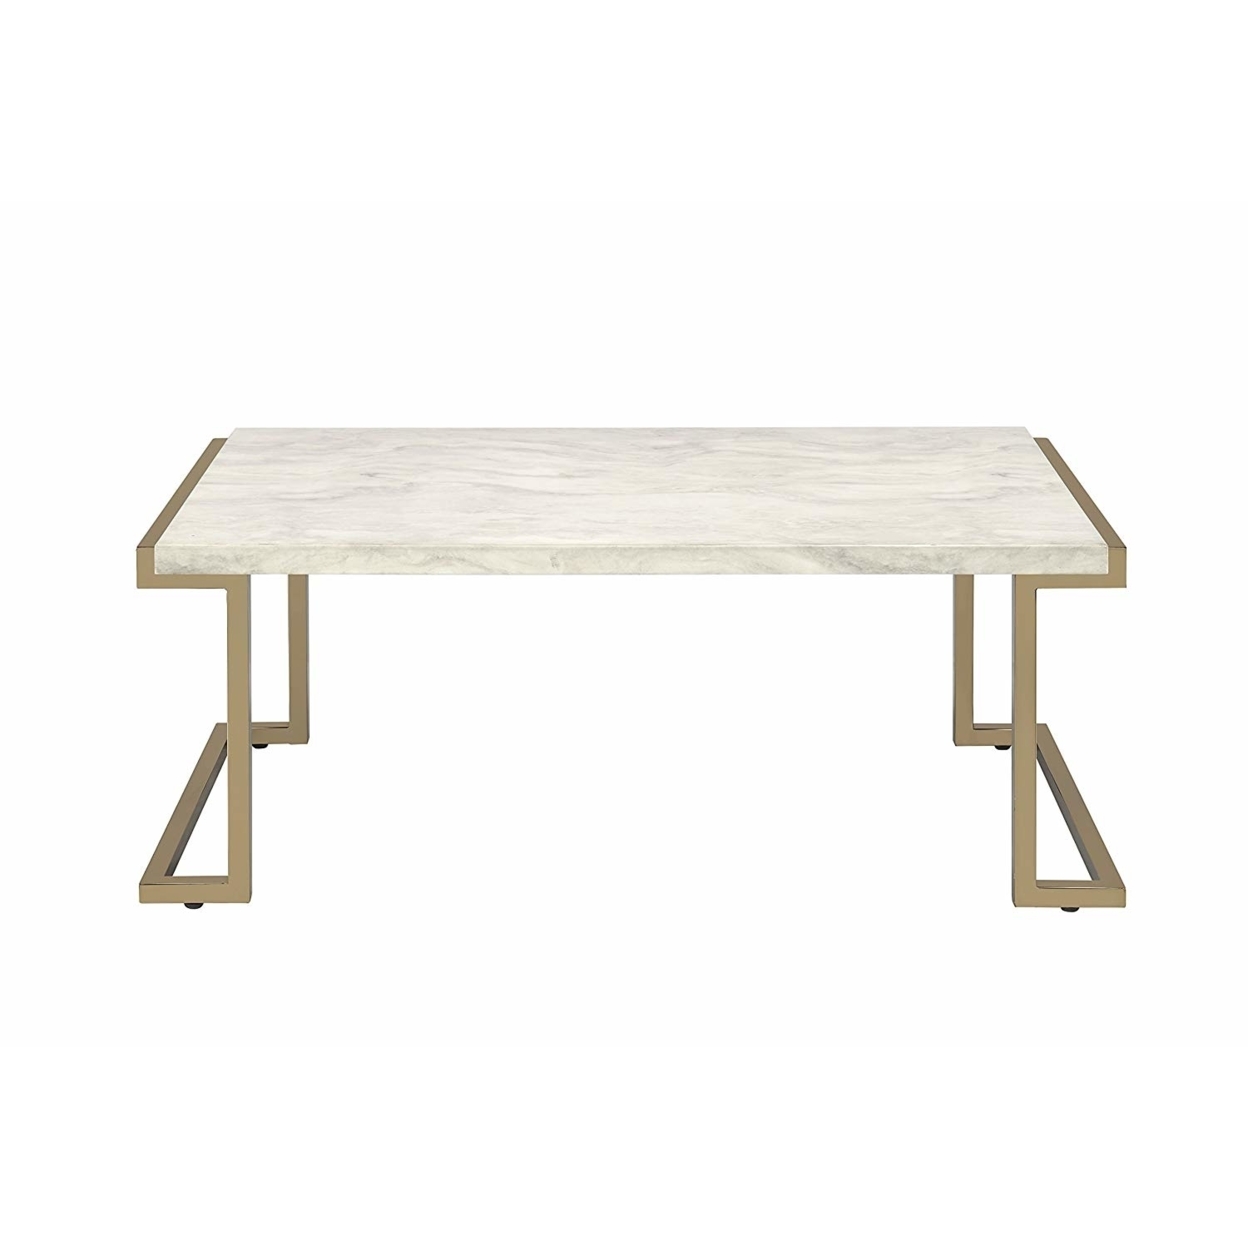 Faux Marble Top Coffee Table With Metal Base, White And Gold- Saltoro Sherpi